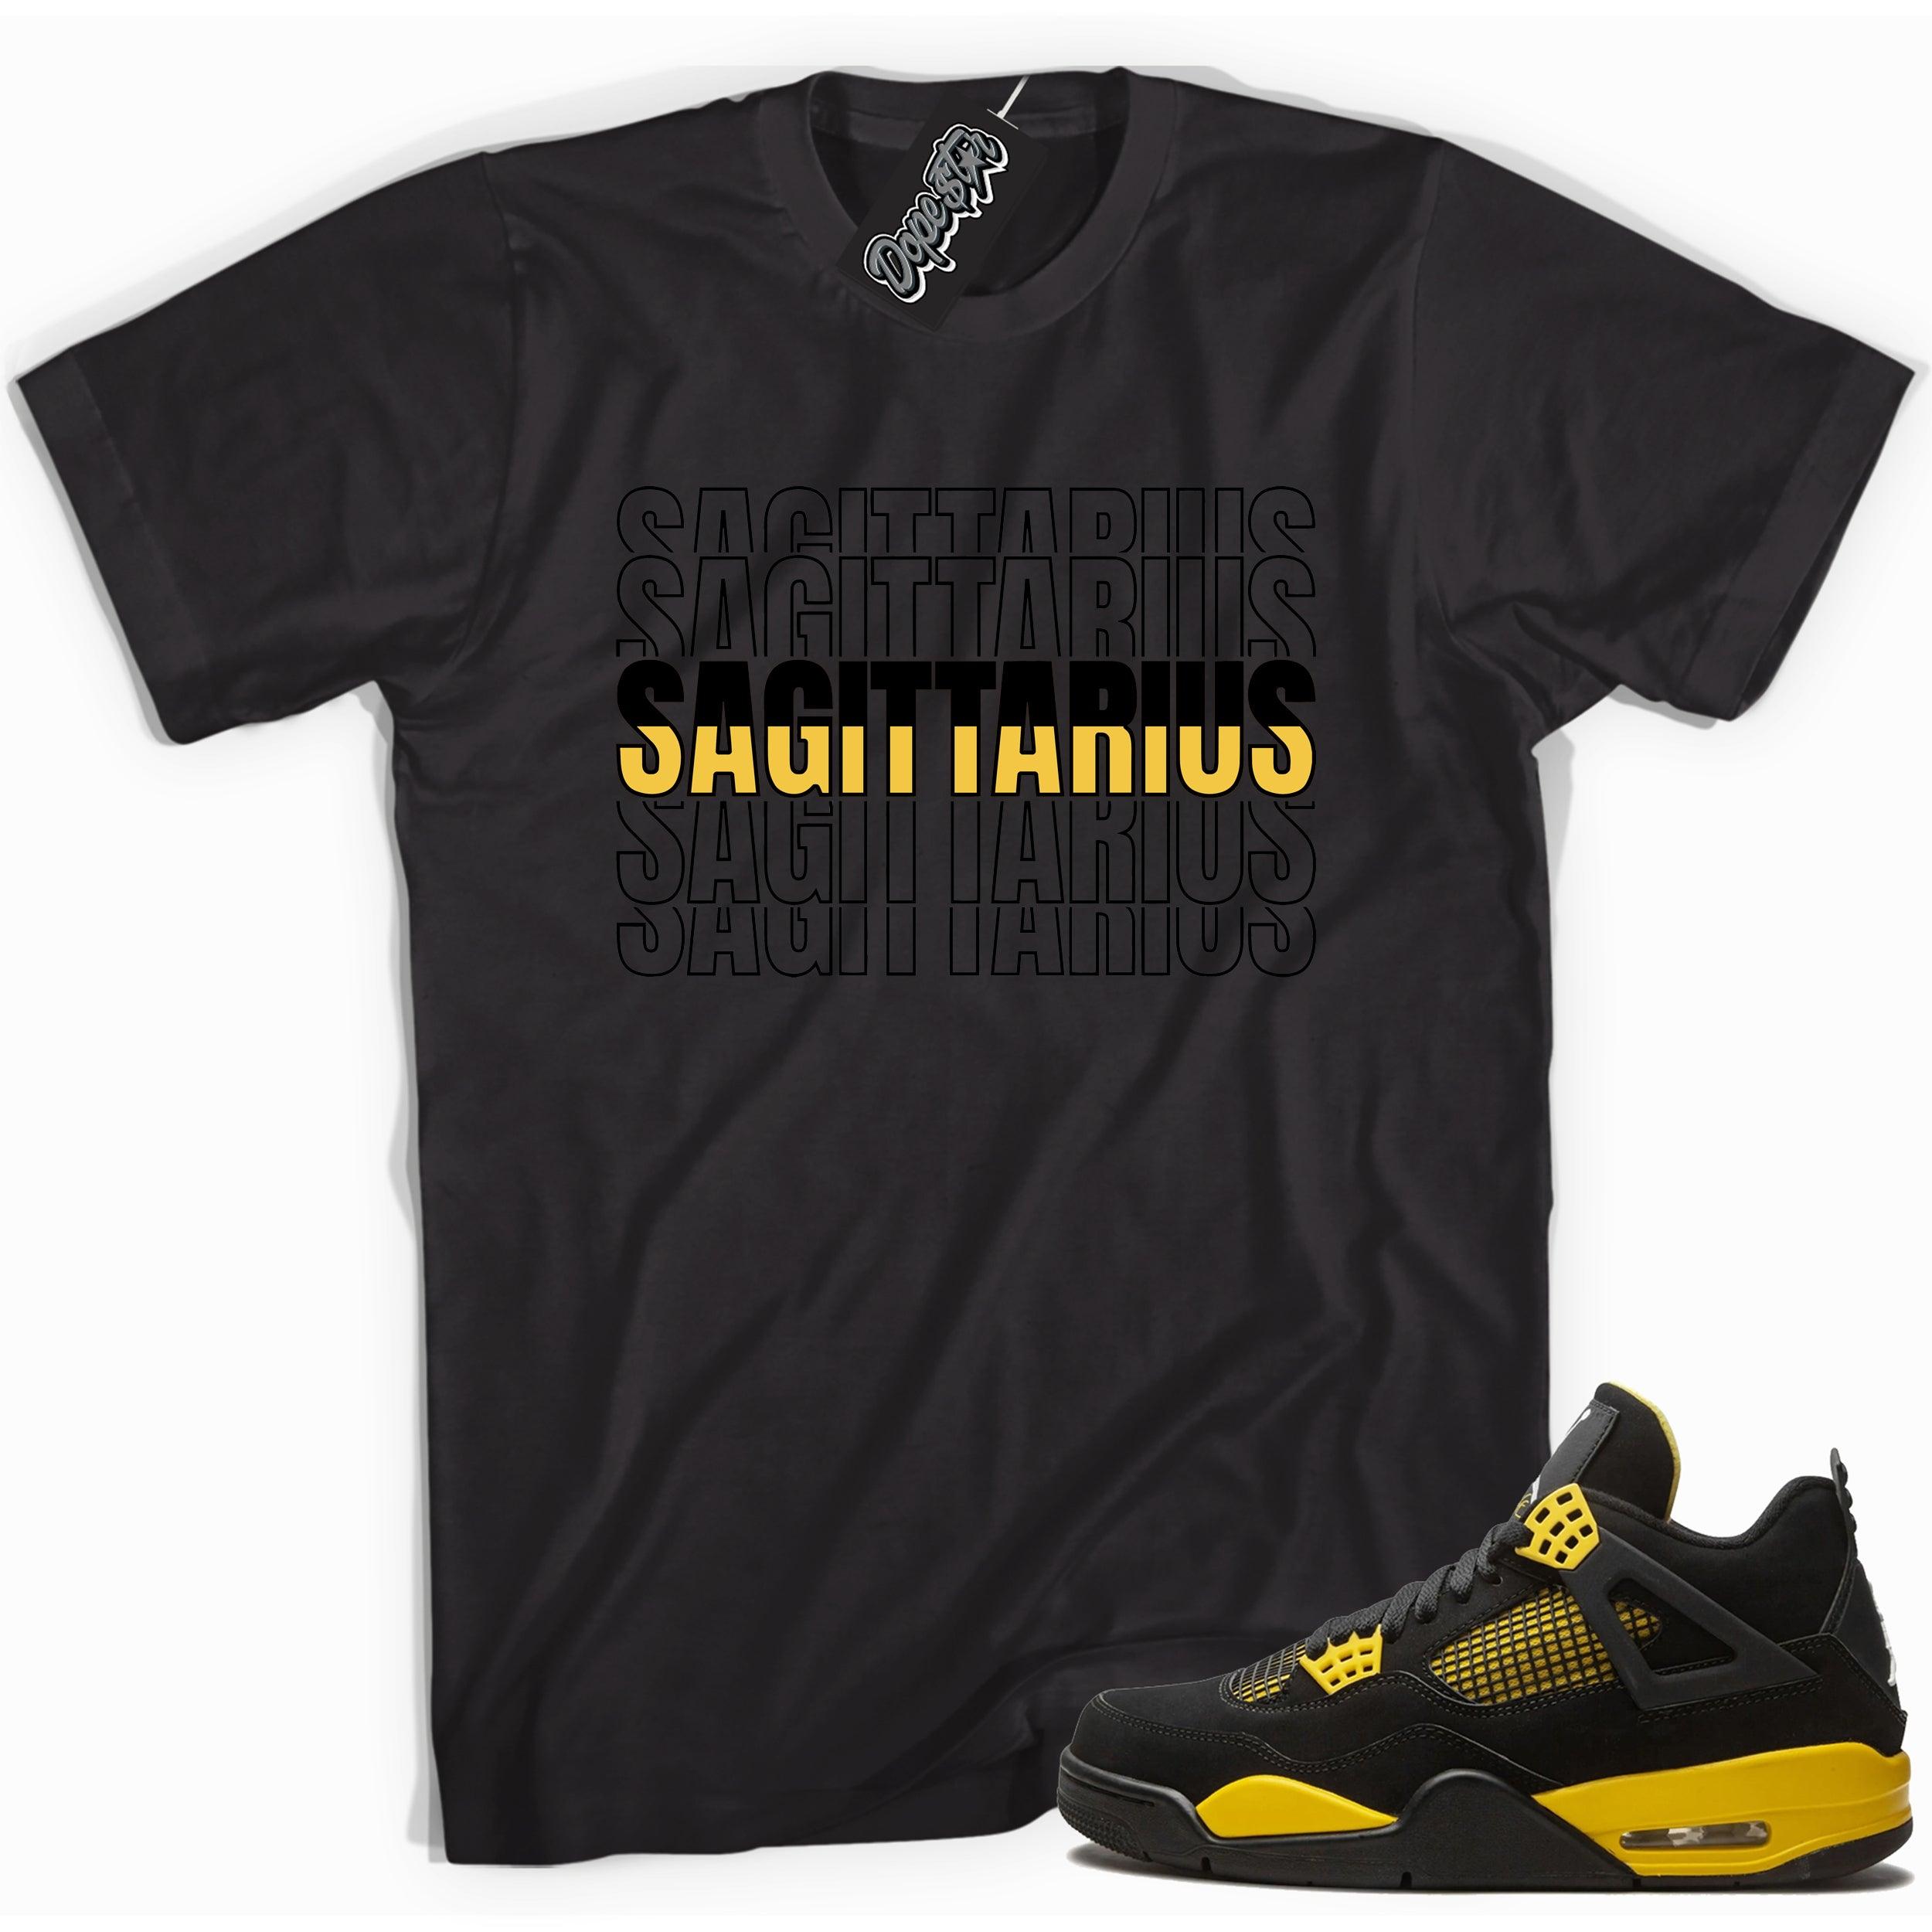 Cool black graphic tee with 'sagittarius' print, that perfectly matches  Air Jordan 4 Thunder sneakers